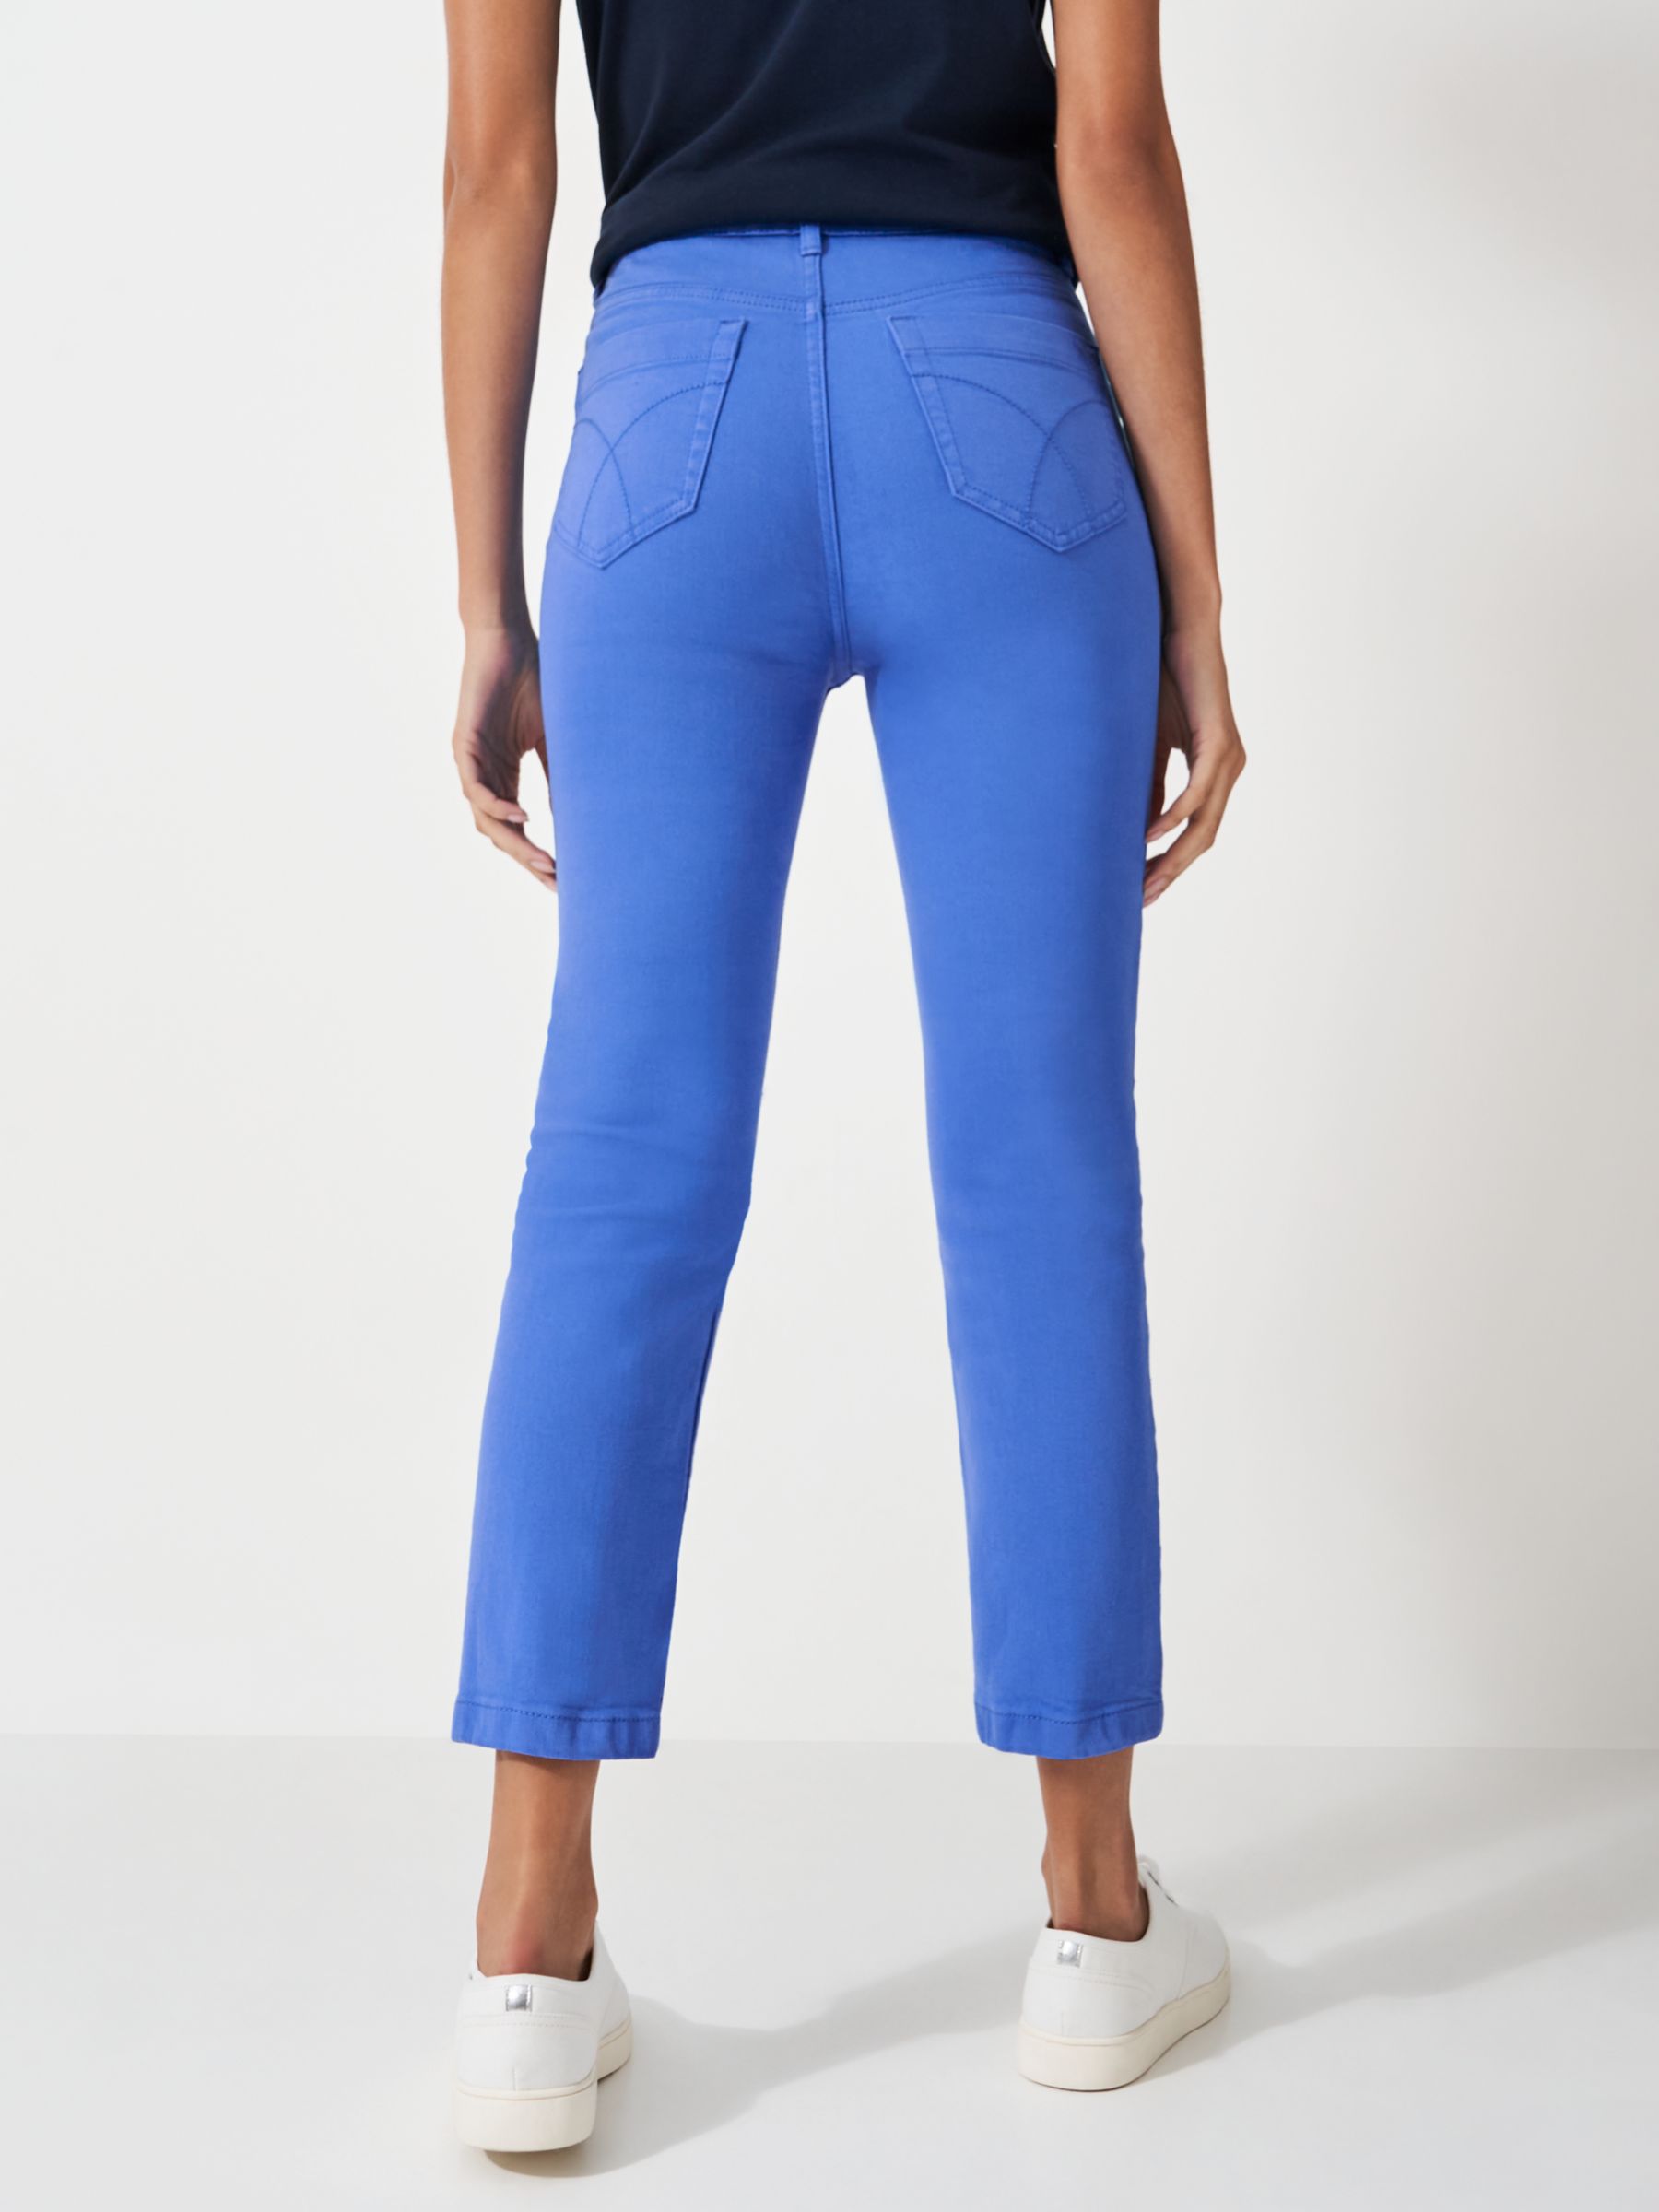 Buy Crew Clothing Cropped Jeans Online at johnlewis.com